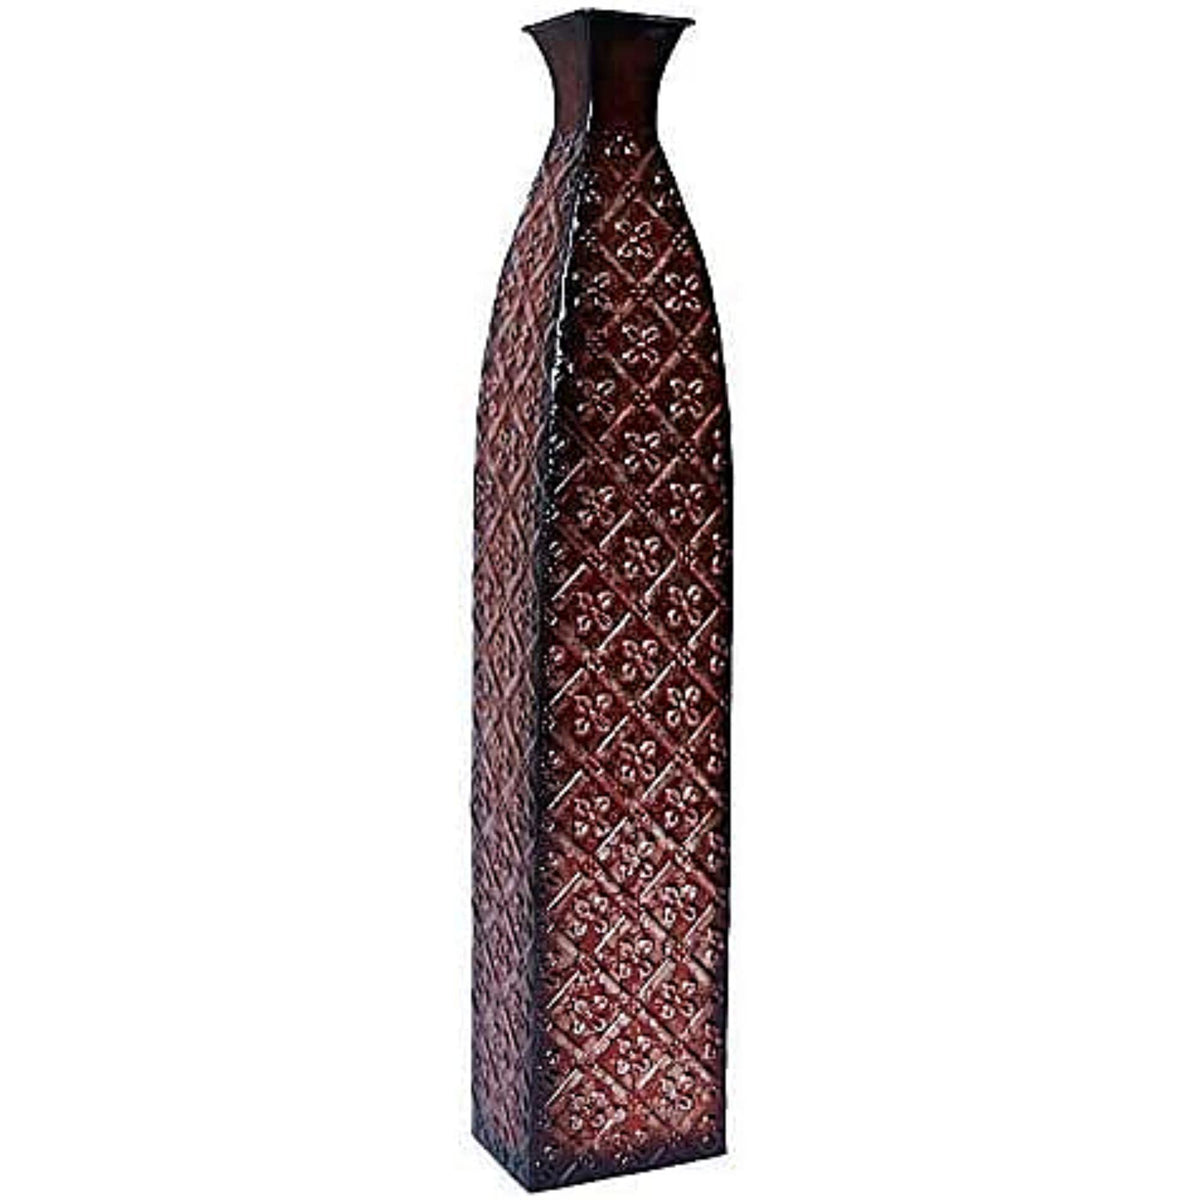 HOSLEY® Metal  Floor Vase, Red Color , 24.5 Inches High